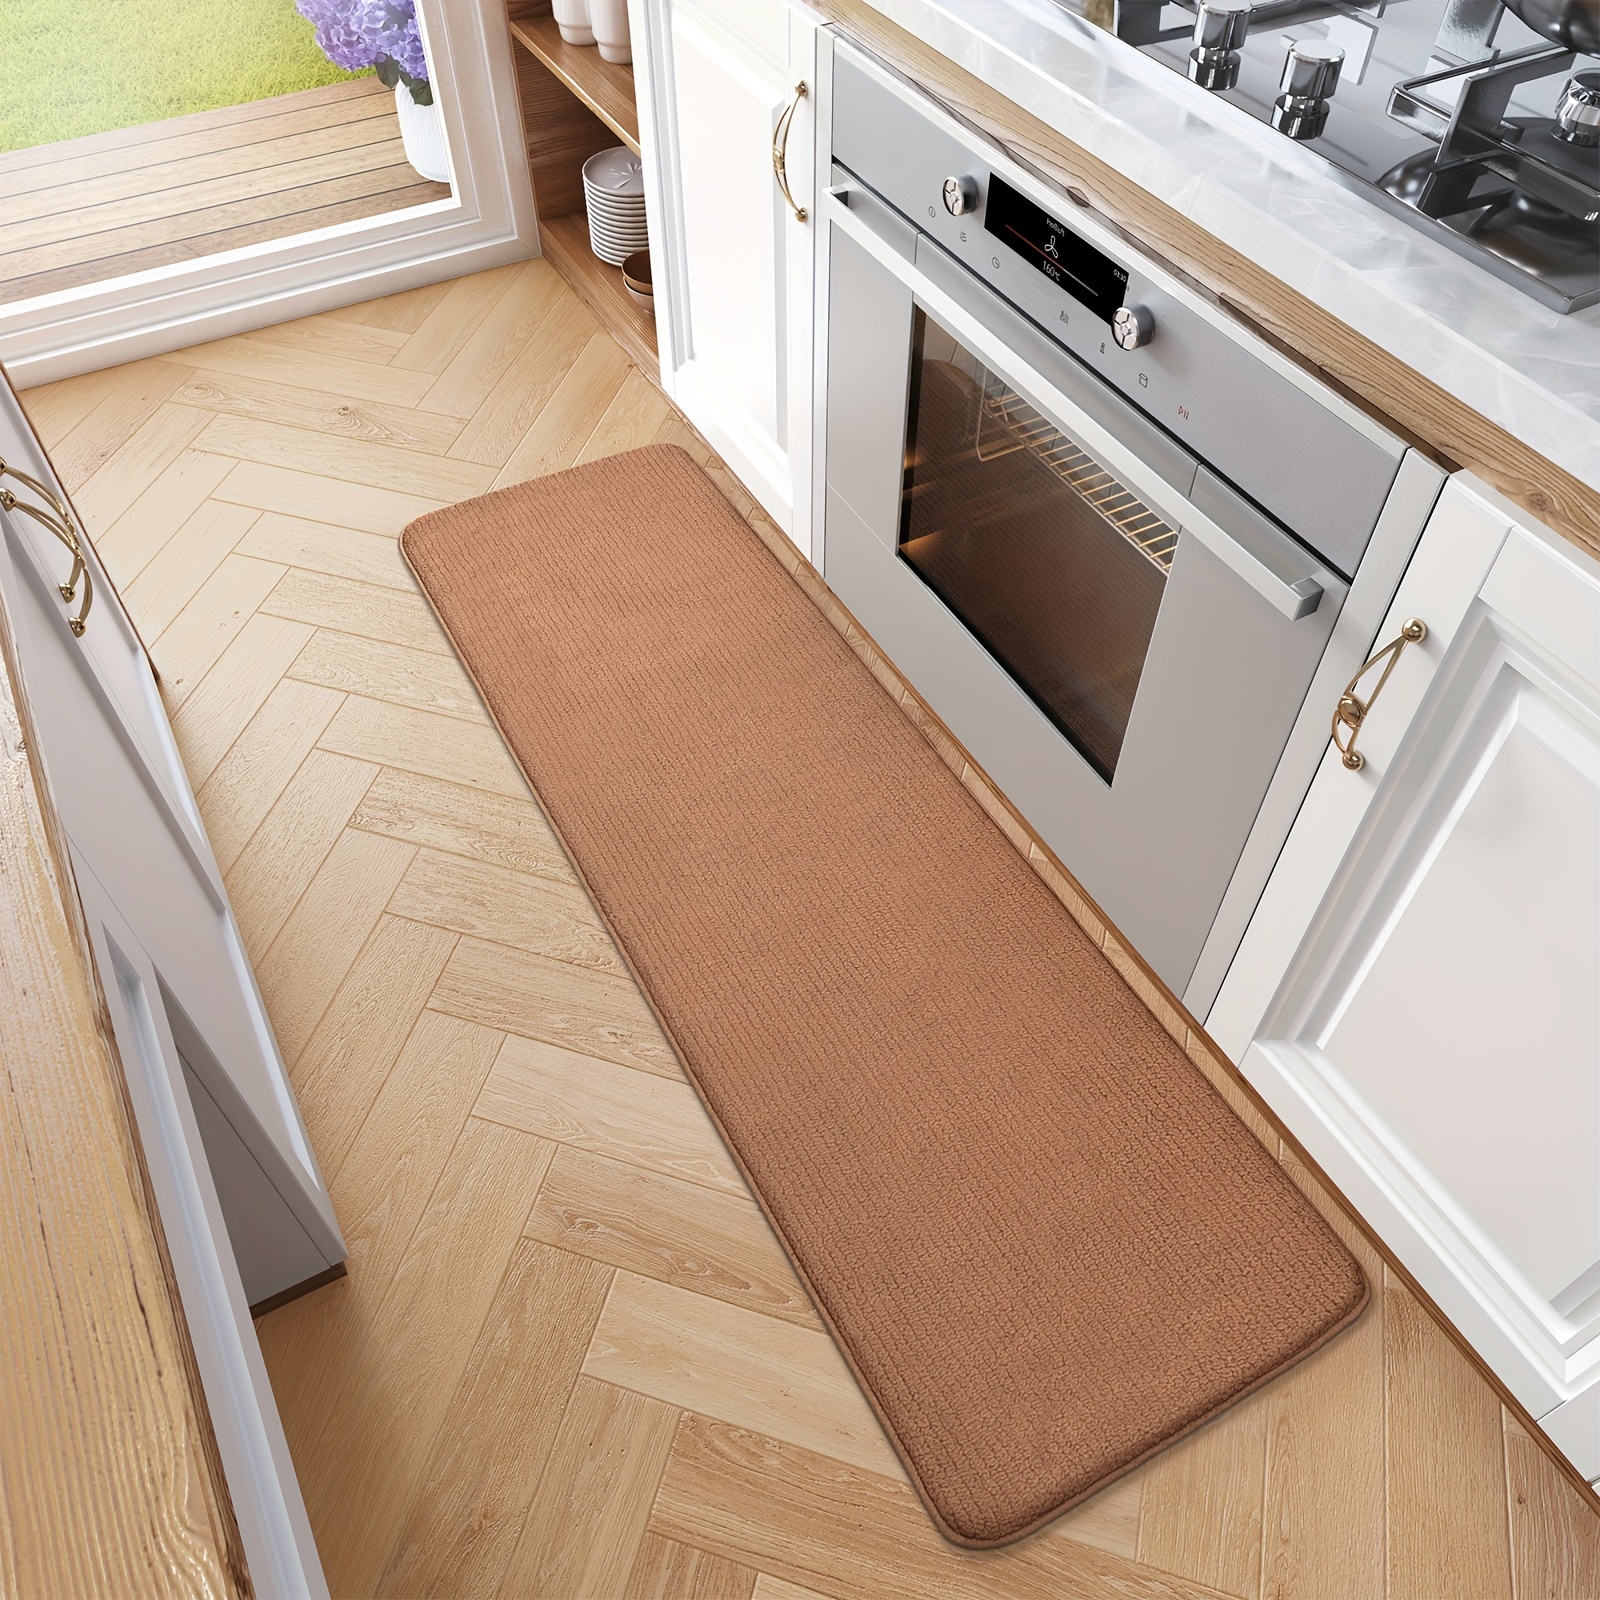 Kitchen Floor Mats for in Front of Sink Kitchen Rugs and Mats Non-Skid  Twill Kitchen Mat Standing Mat Washable, Size 24x40